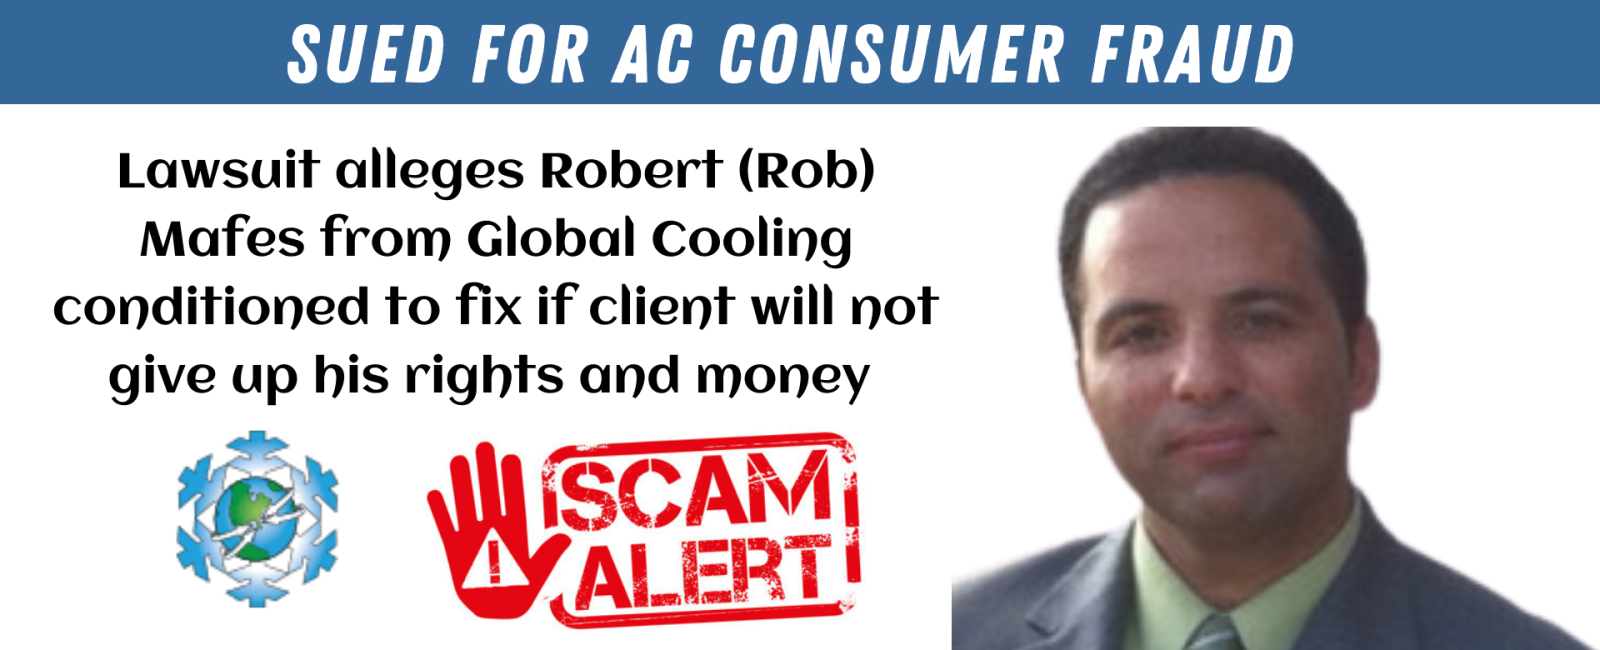 Robert Mafes, CEO of Global Cooling LLC, sued for AC consumer fraud